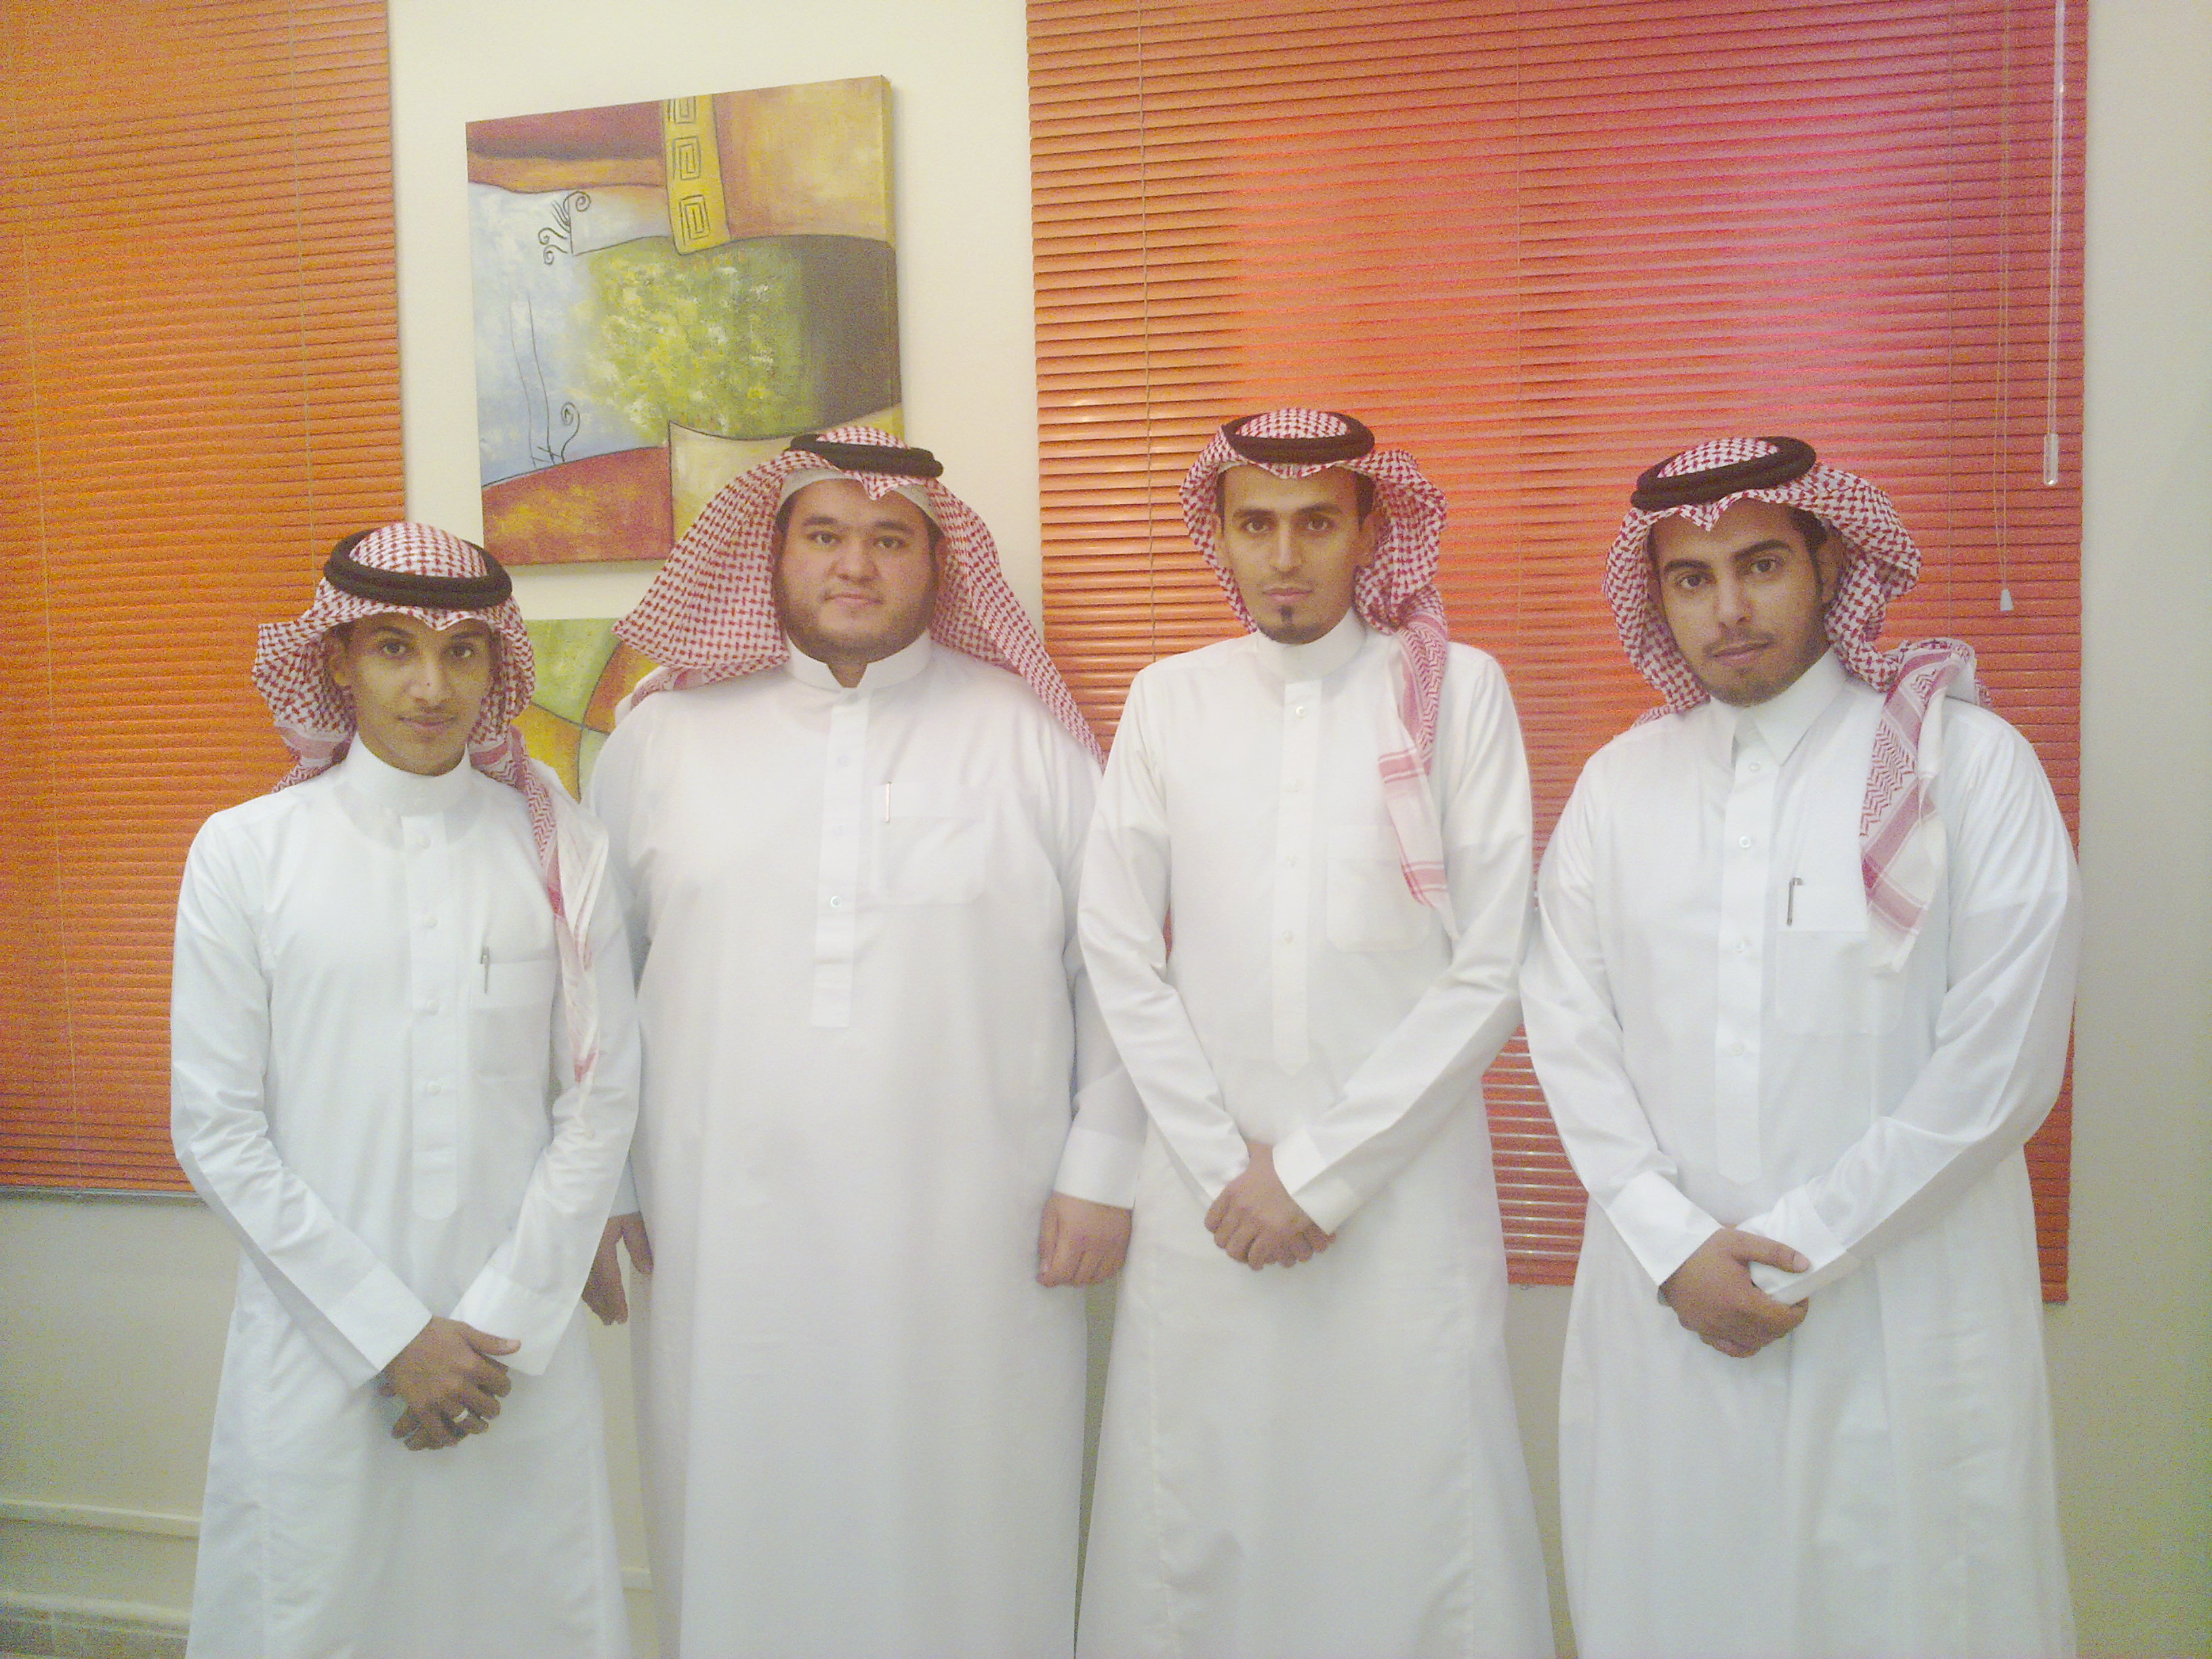 Al Masar Agency Graduates 6 graduates who successfully completed their training program